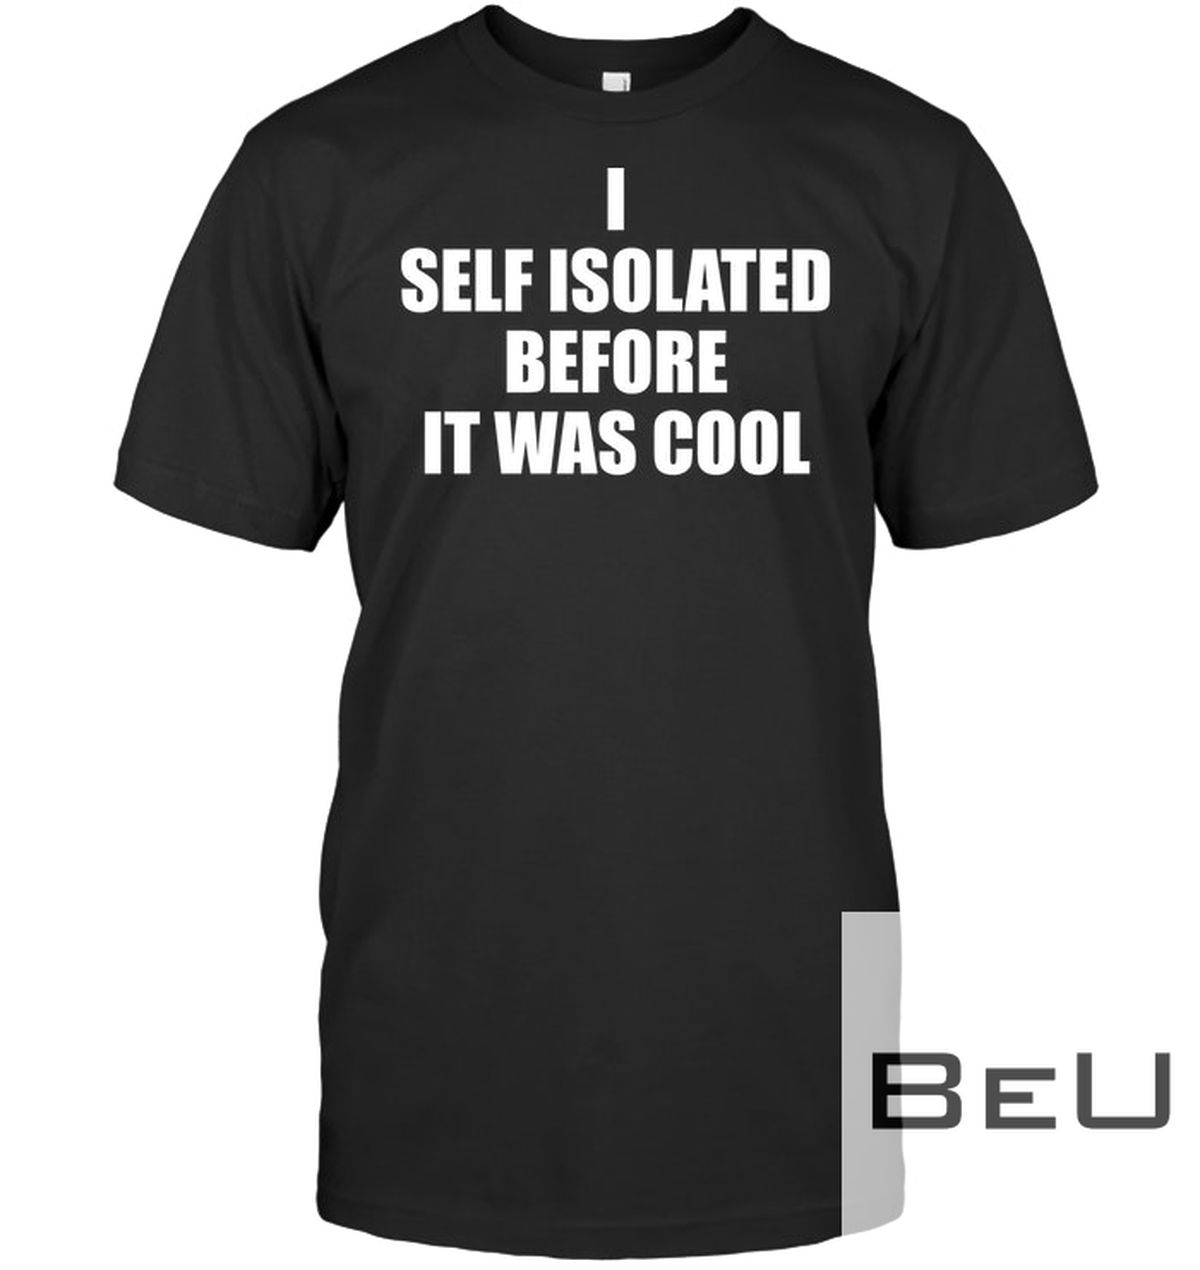 I Self Isolated Before It Was Cool Shirt